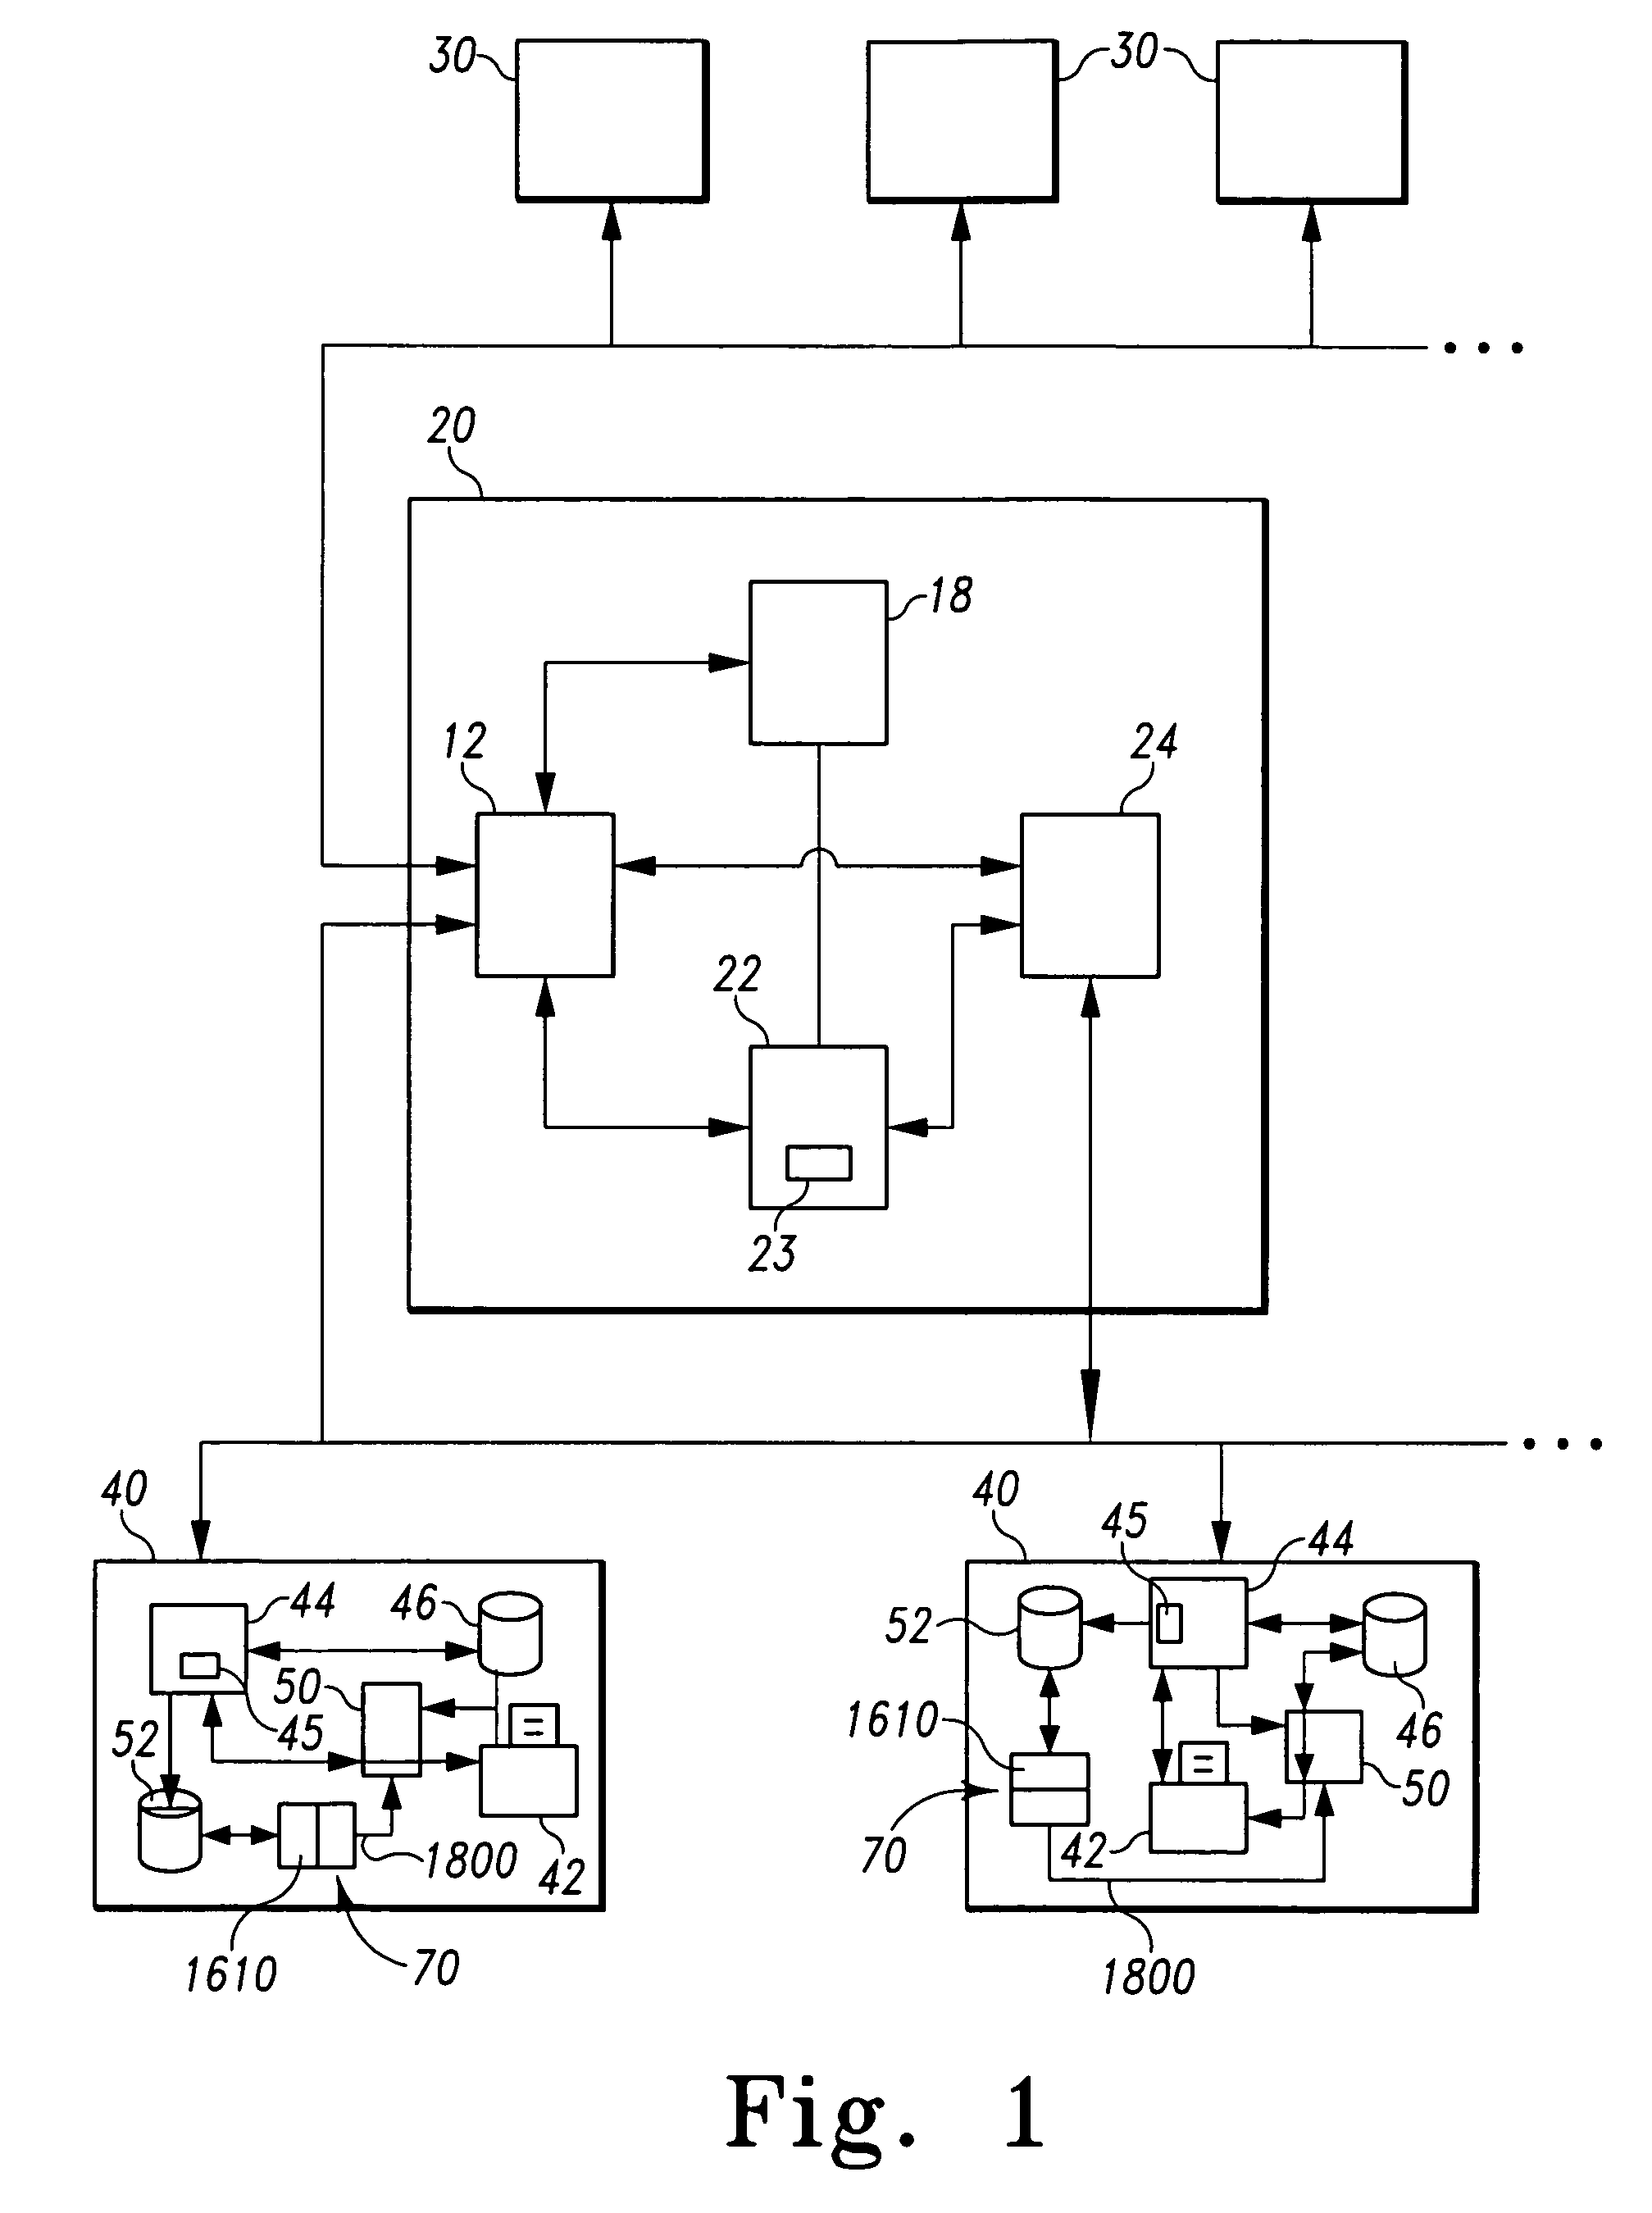 System and method for electronic document generation and delivery